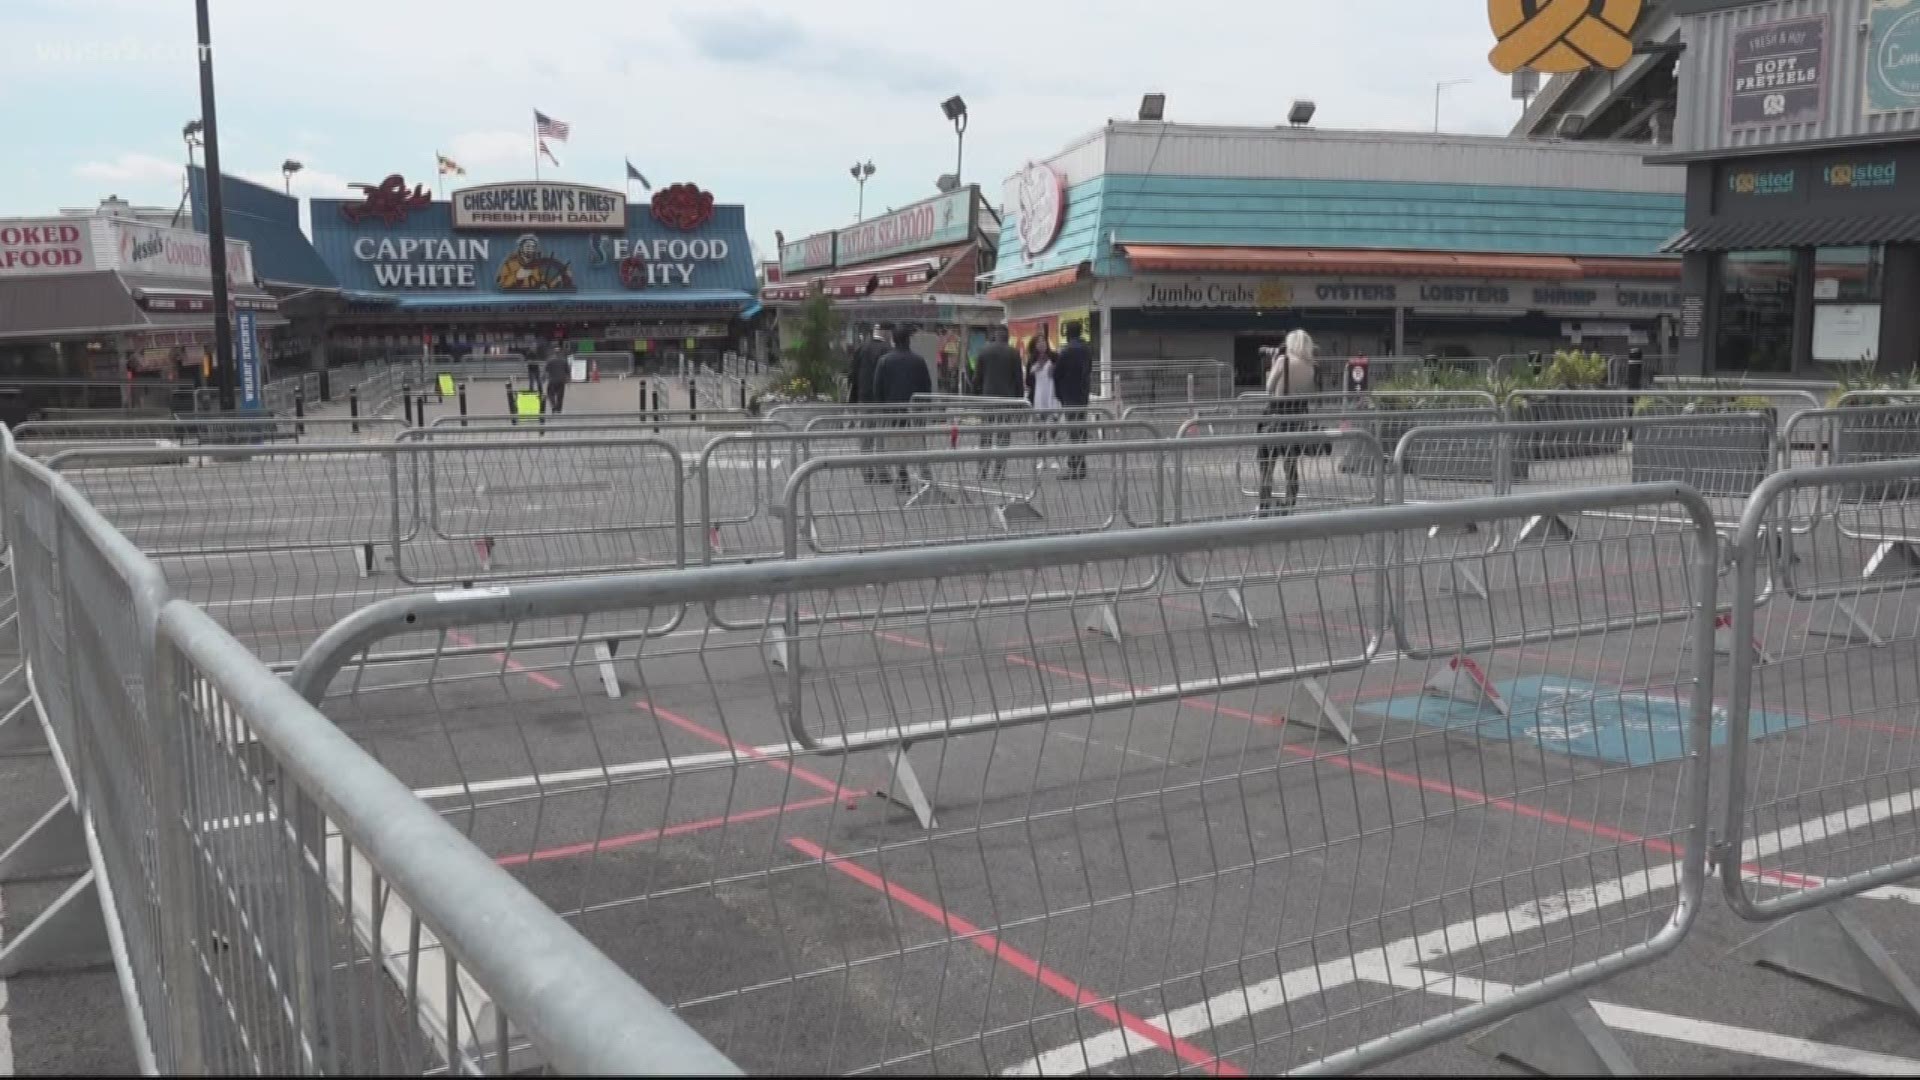 Mayor must approve new plan which includes barricades and more police.